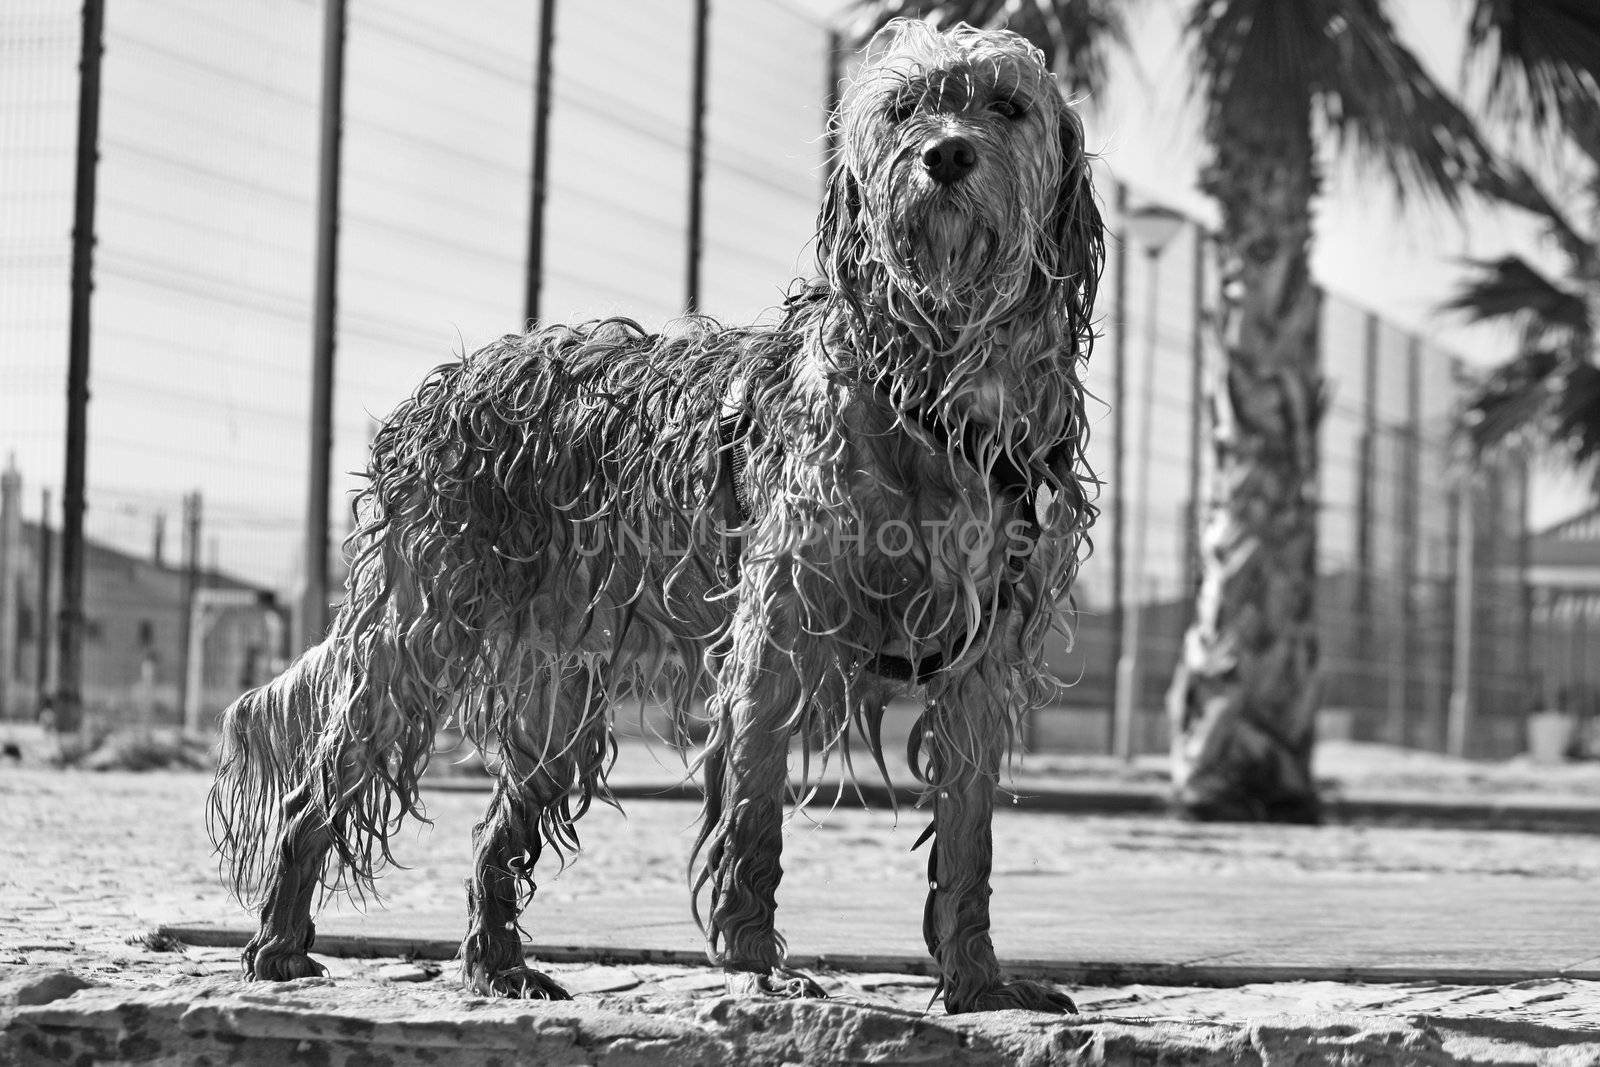 View of a domestic dog with his fur wet standing on the ground.